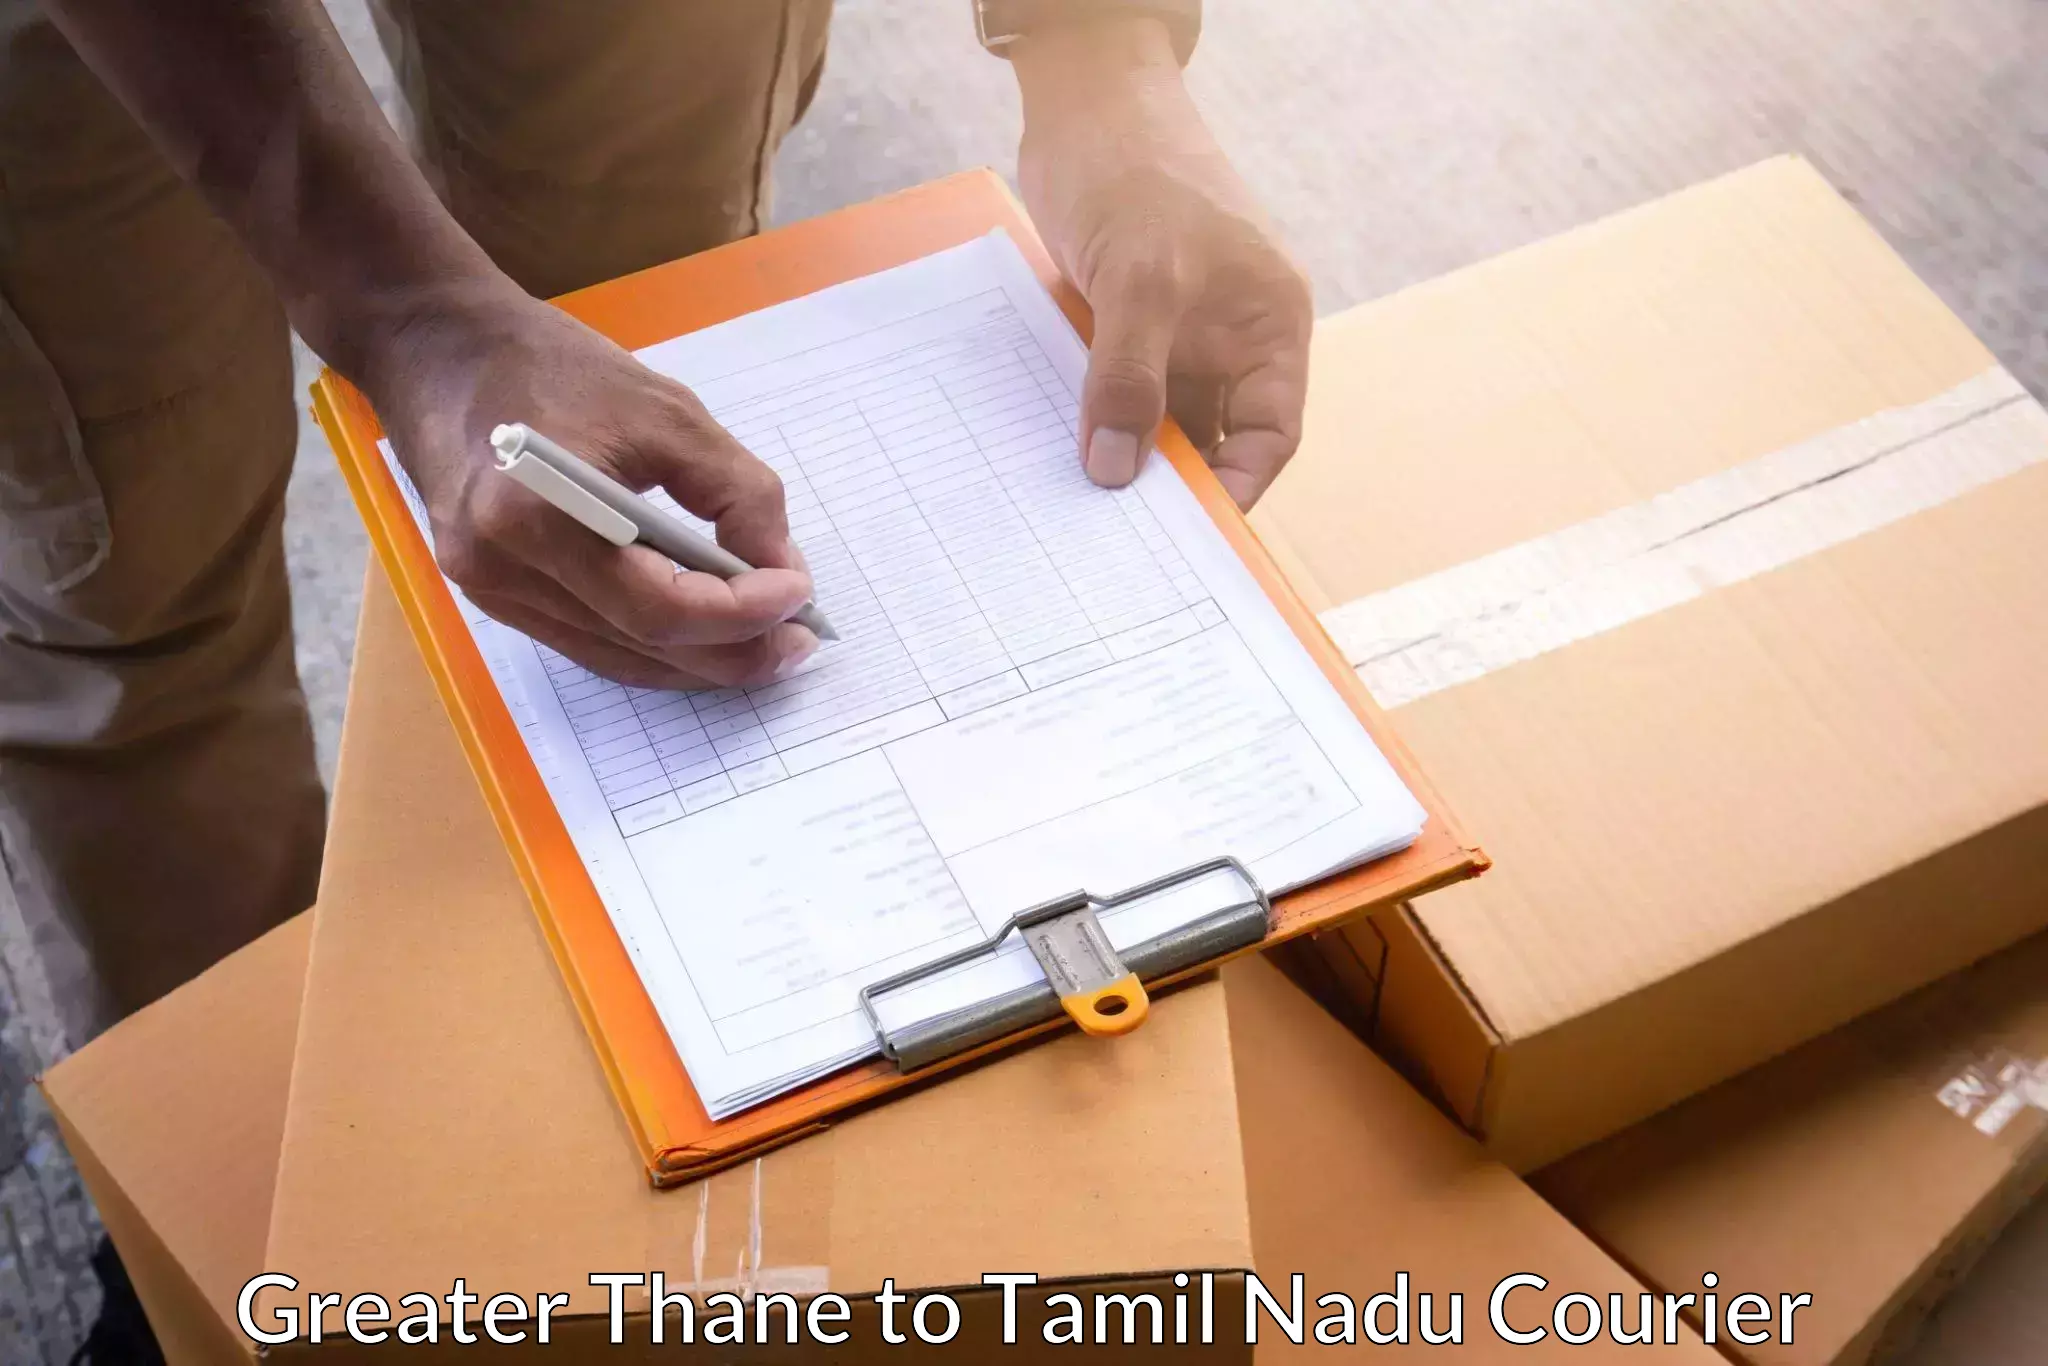 Modern delivery methods in Greater Thane to Coimbatore